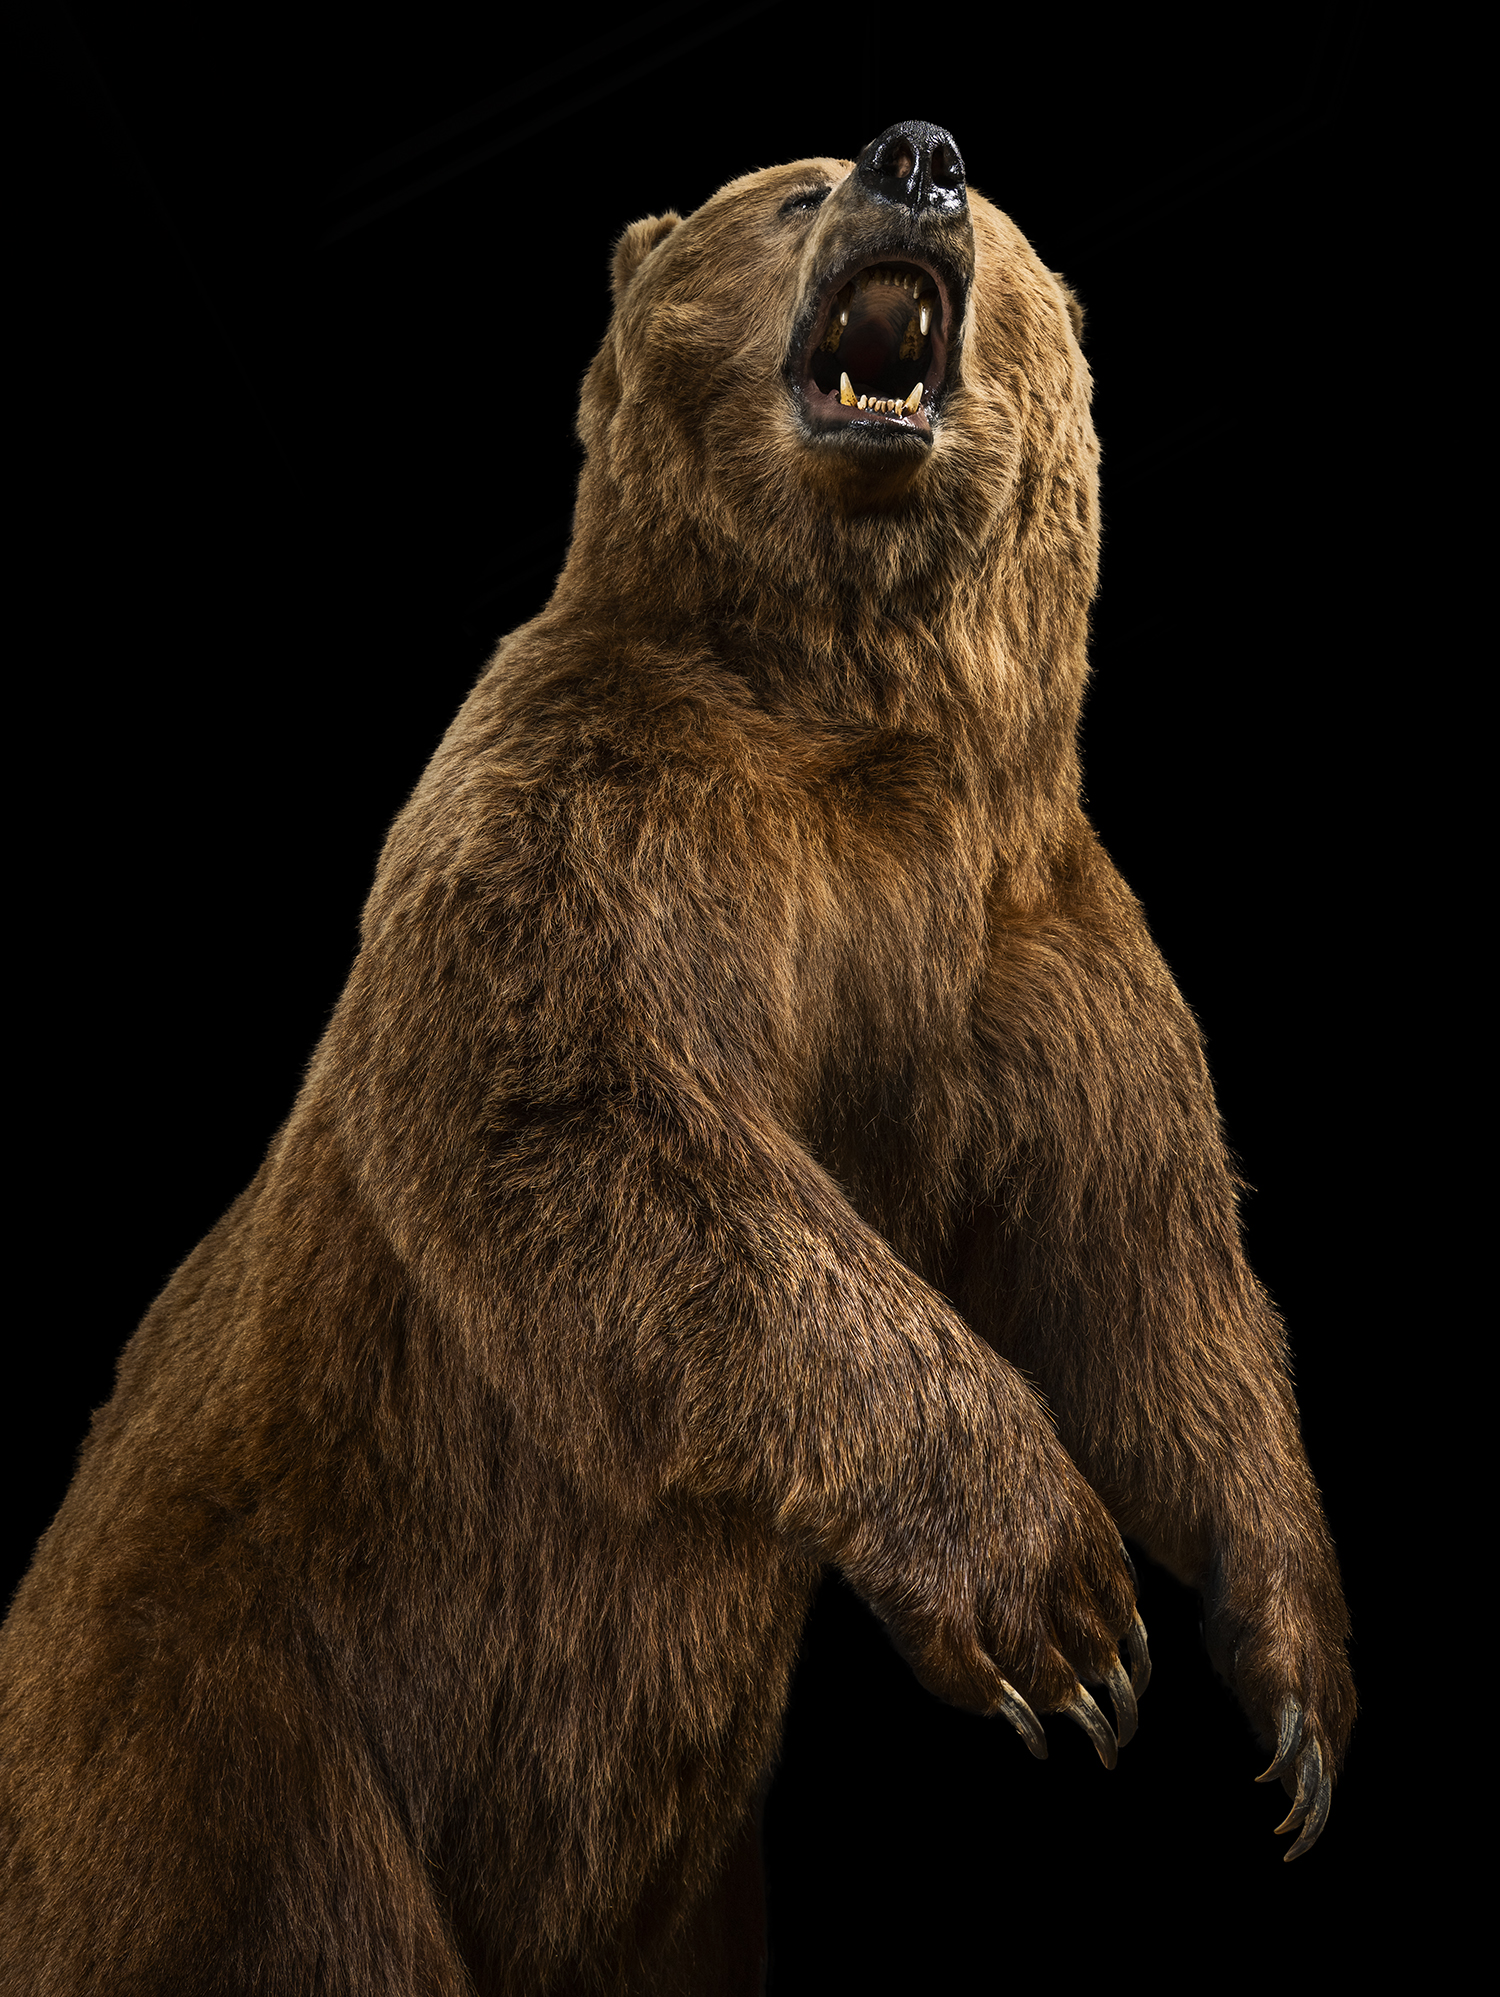 Visit the Wonders of Wildlife museum to see this North American bear.